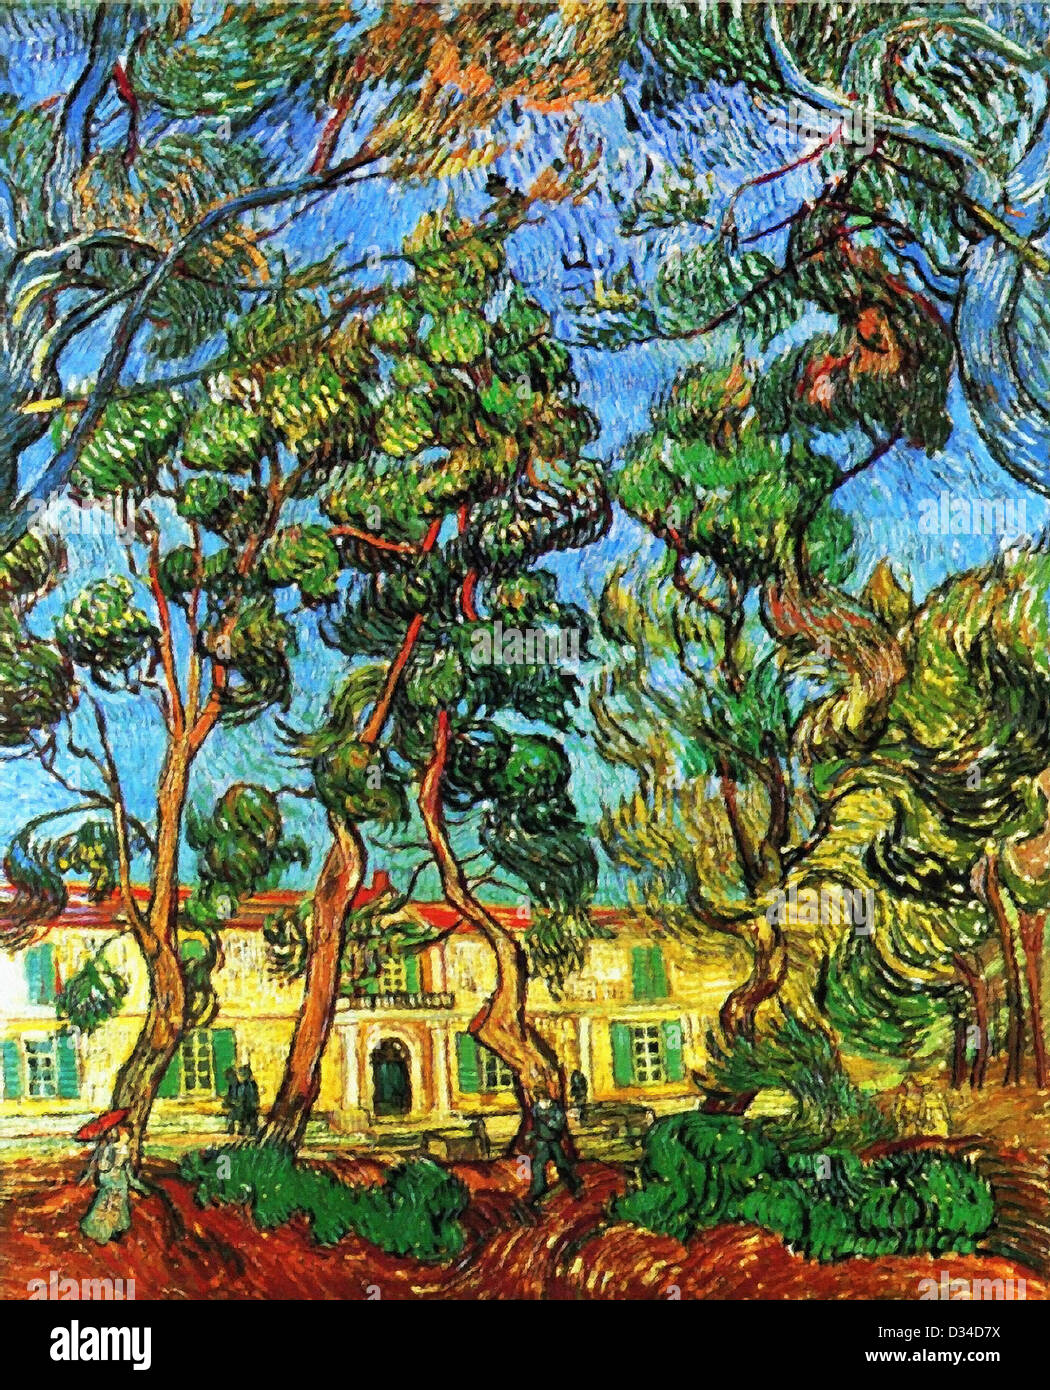 Vincent van Gogh, The Grounds of the Asylum. 1889. Post-Impressionism. Oil on canvas. Armand Hammer Museum of Art Stock Photo